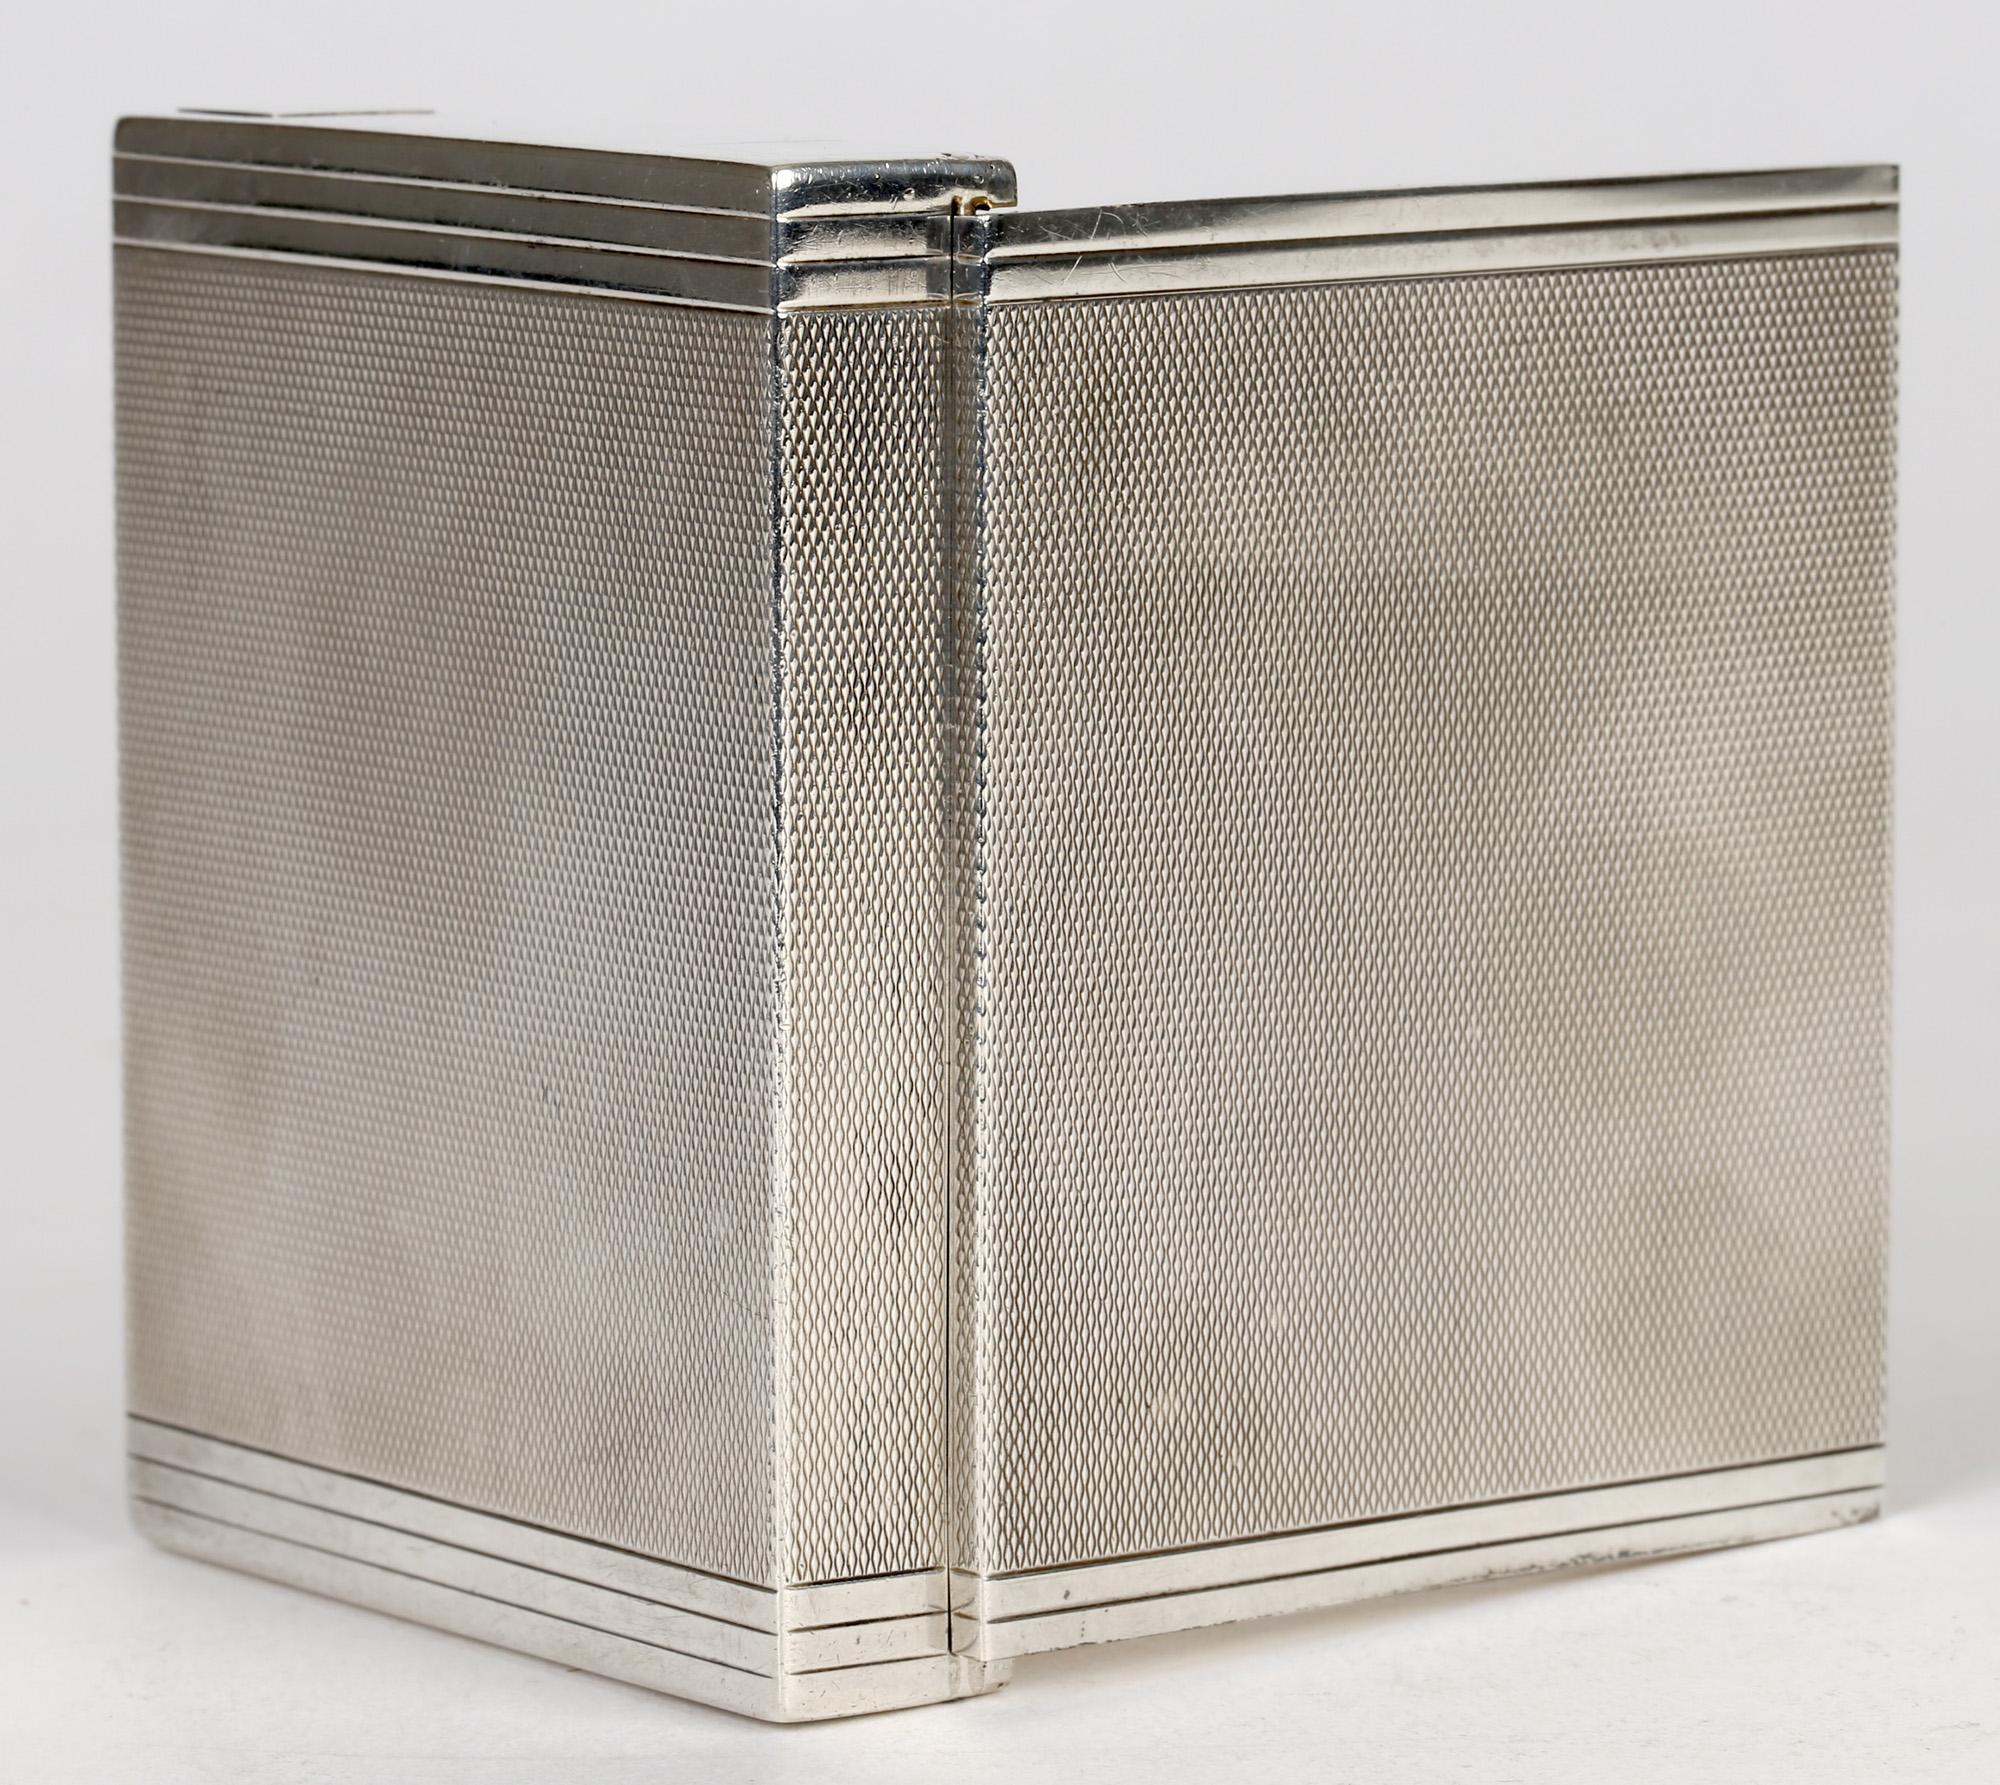 A very fine quality and heavily made vintage Art Deco Cartier silver cigarette or card case made in London in 1936. The rectangular card case has a simple linear design with an engine turned patterned body with square designs to the sides two of